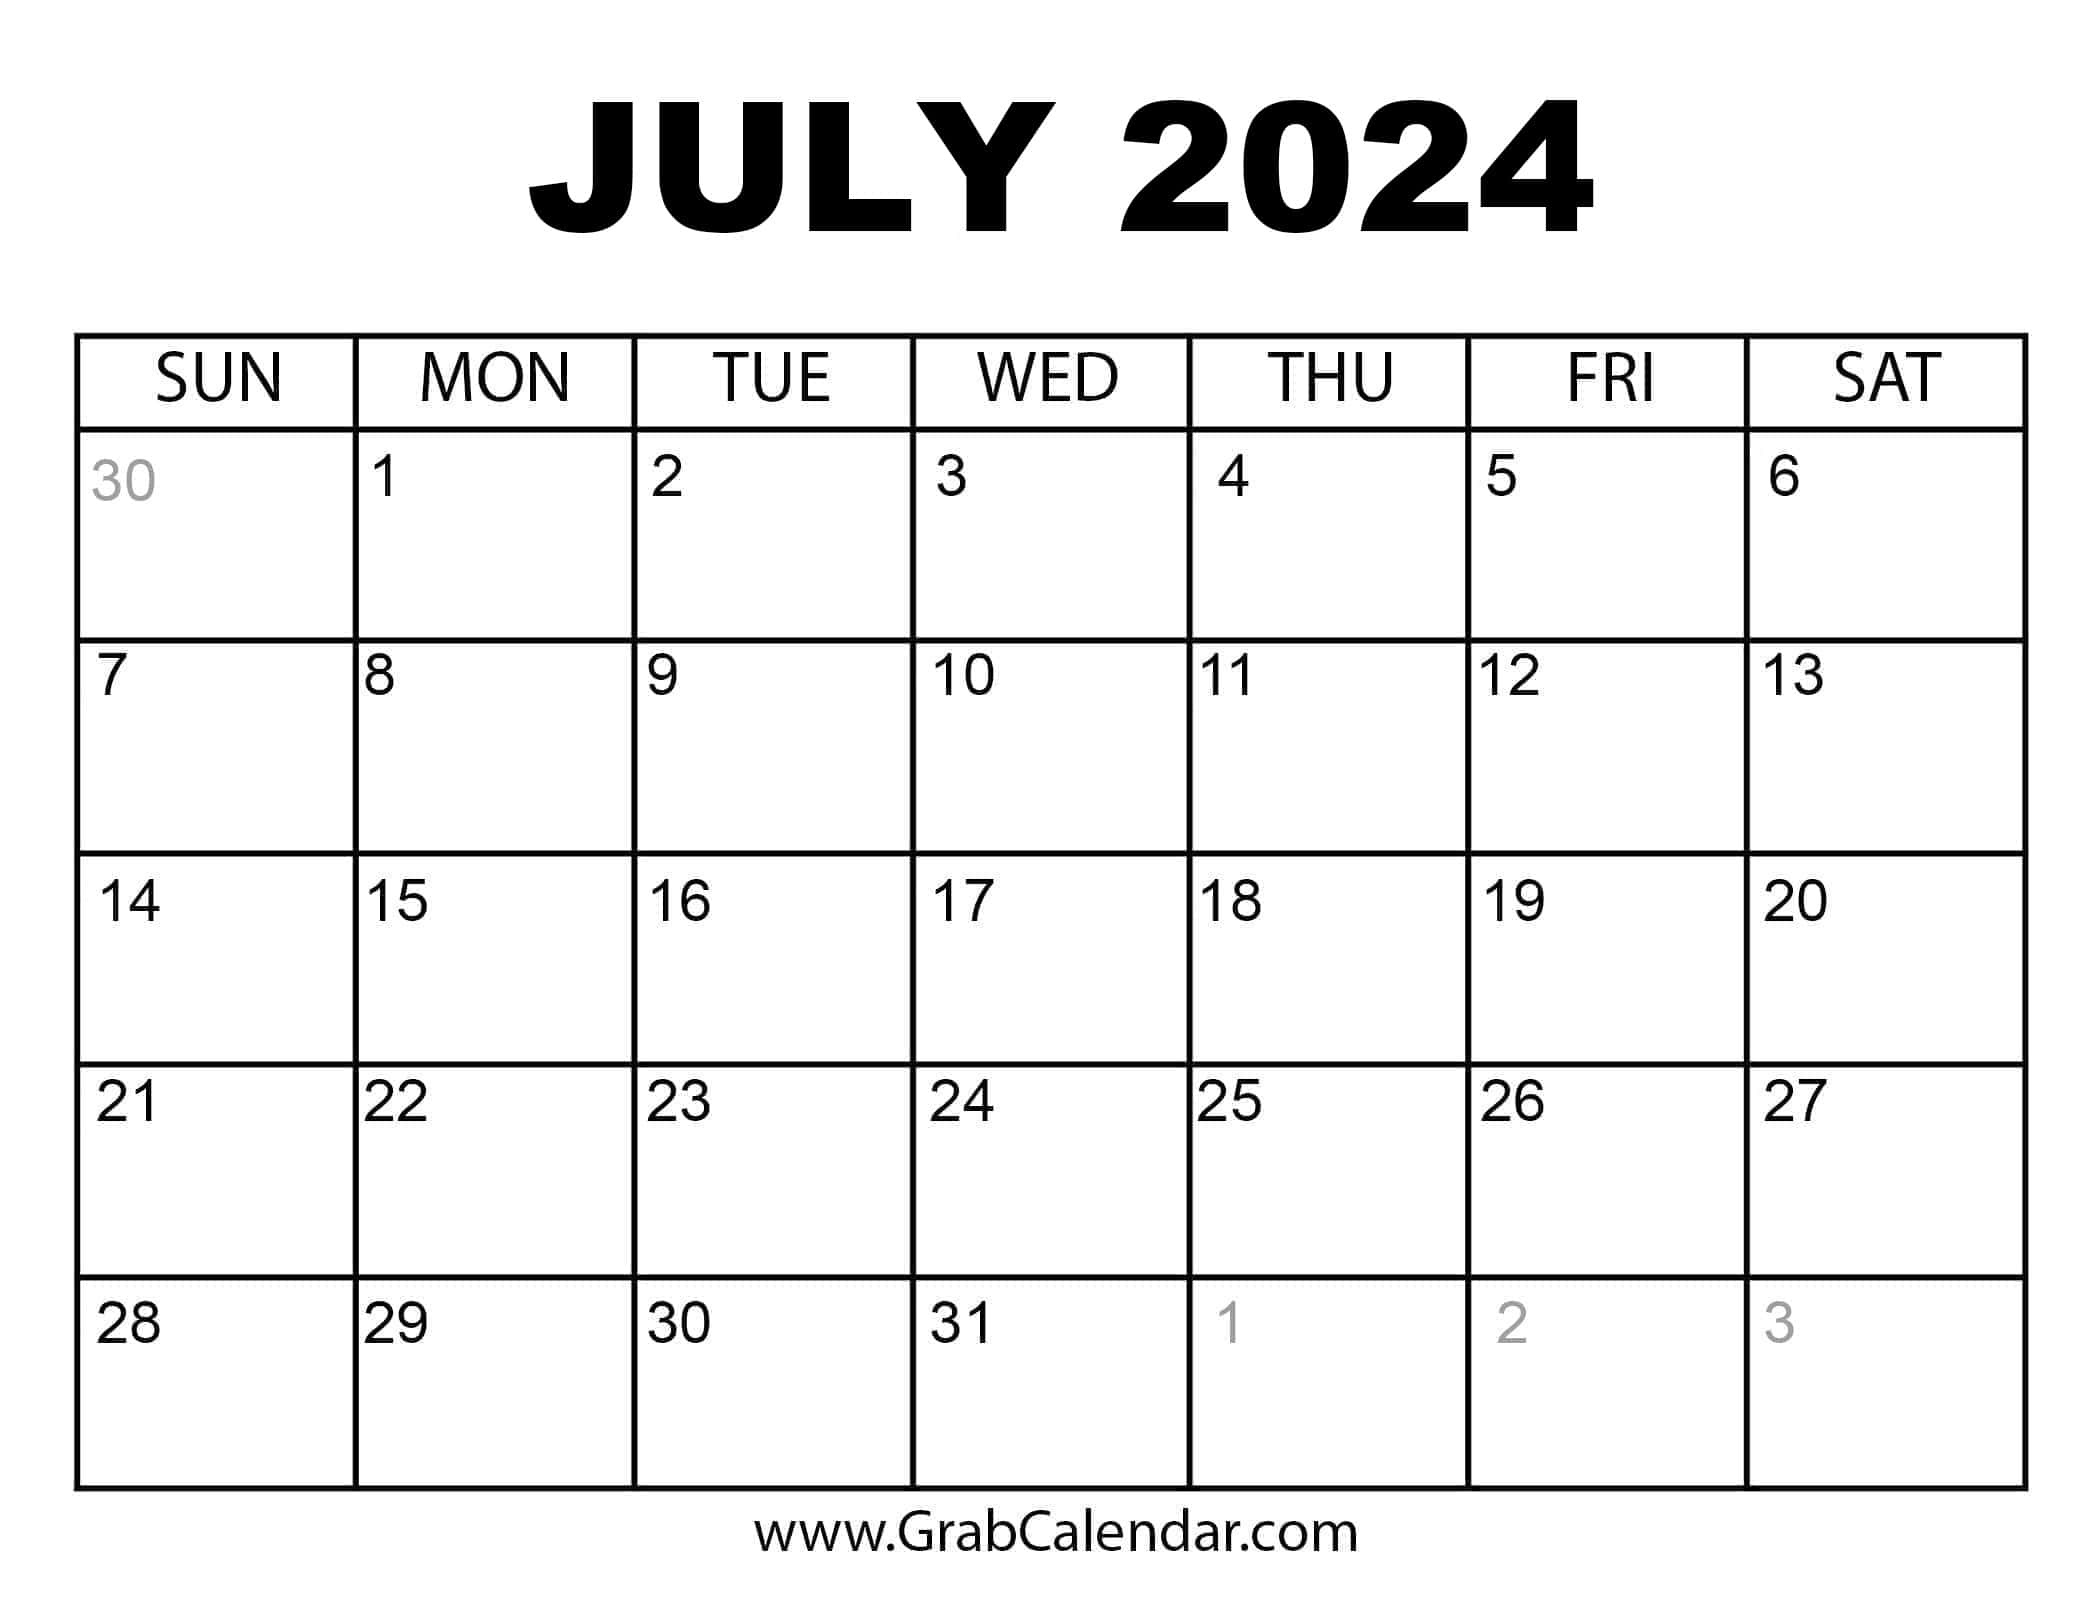 Printable July 2024 Calendar pertaining to 2024 Calender July